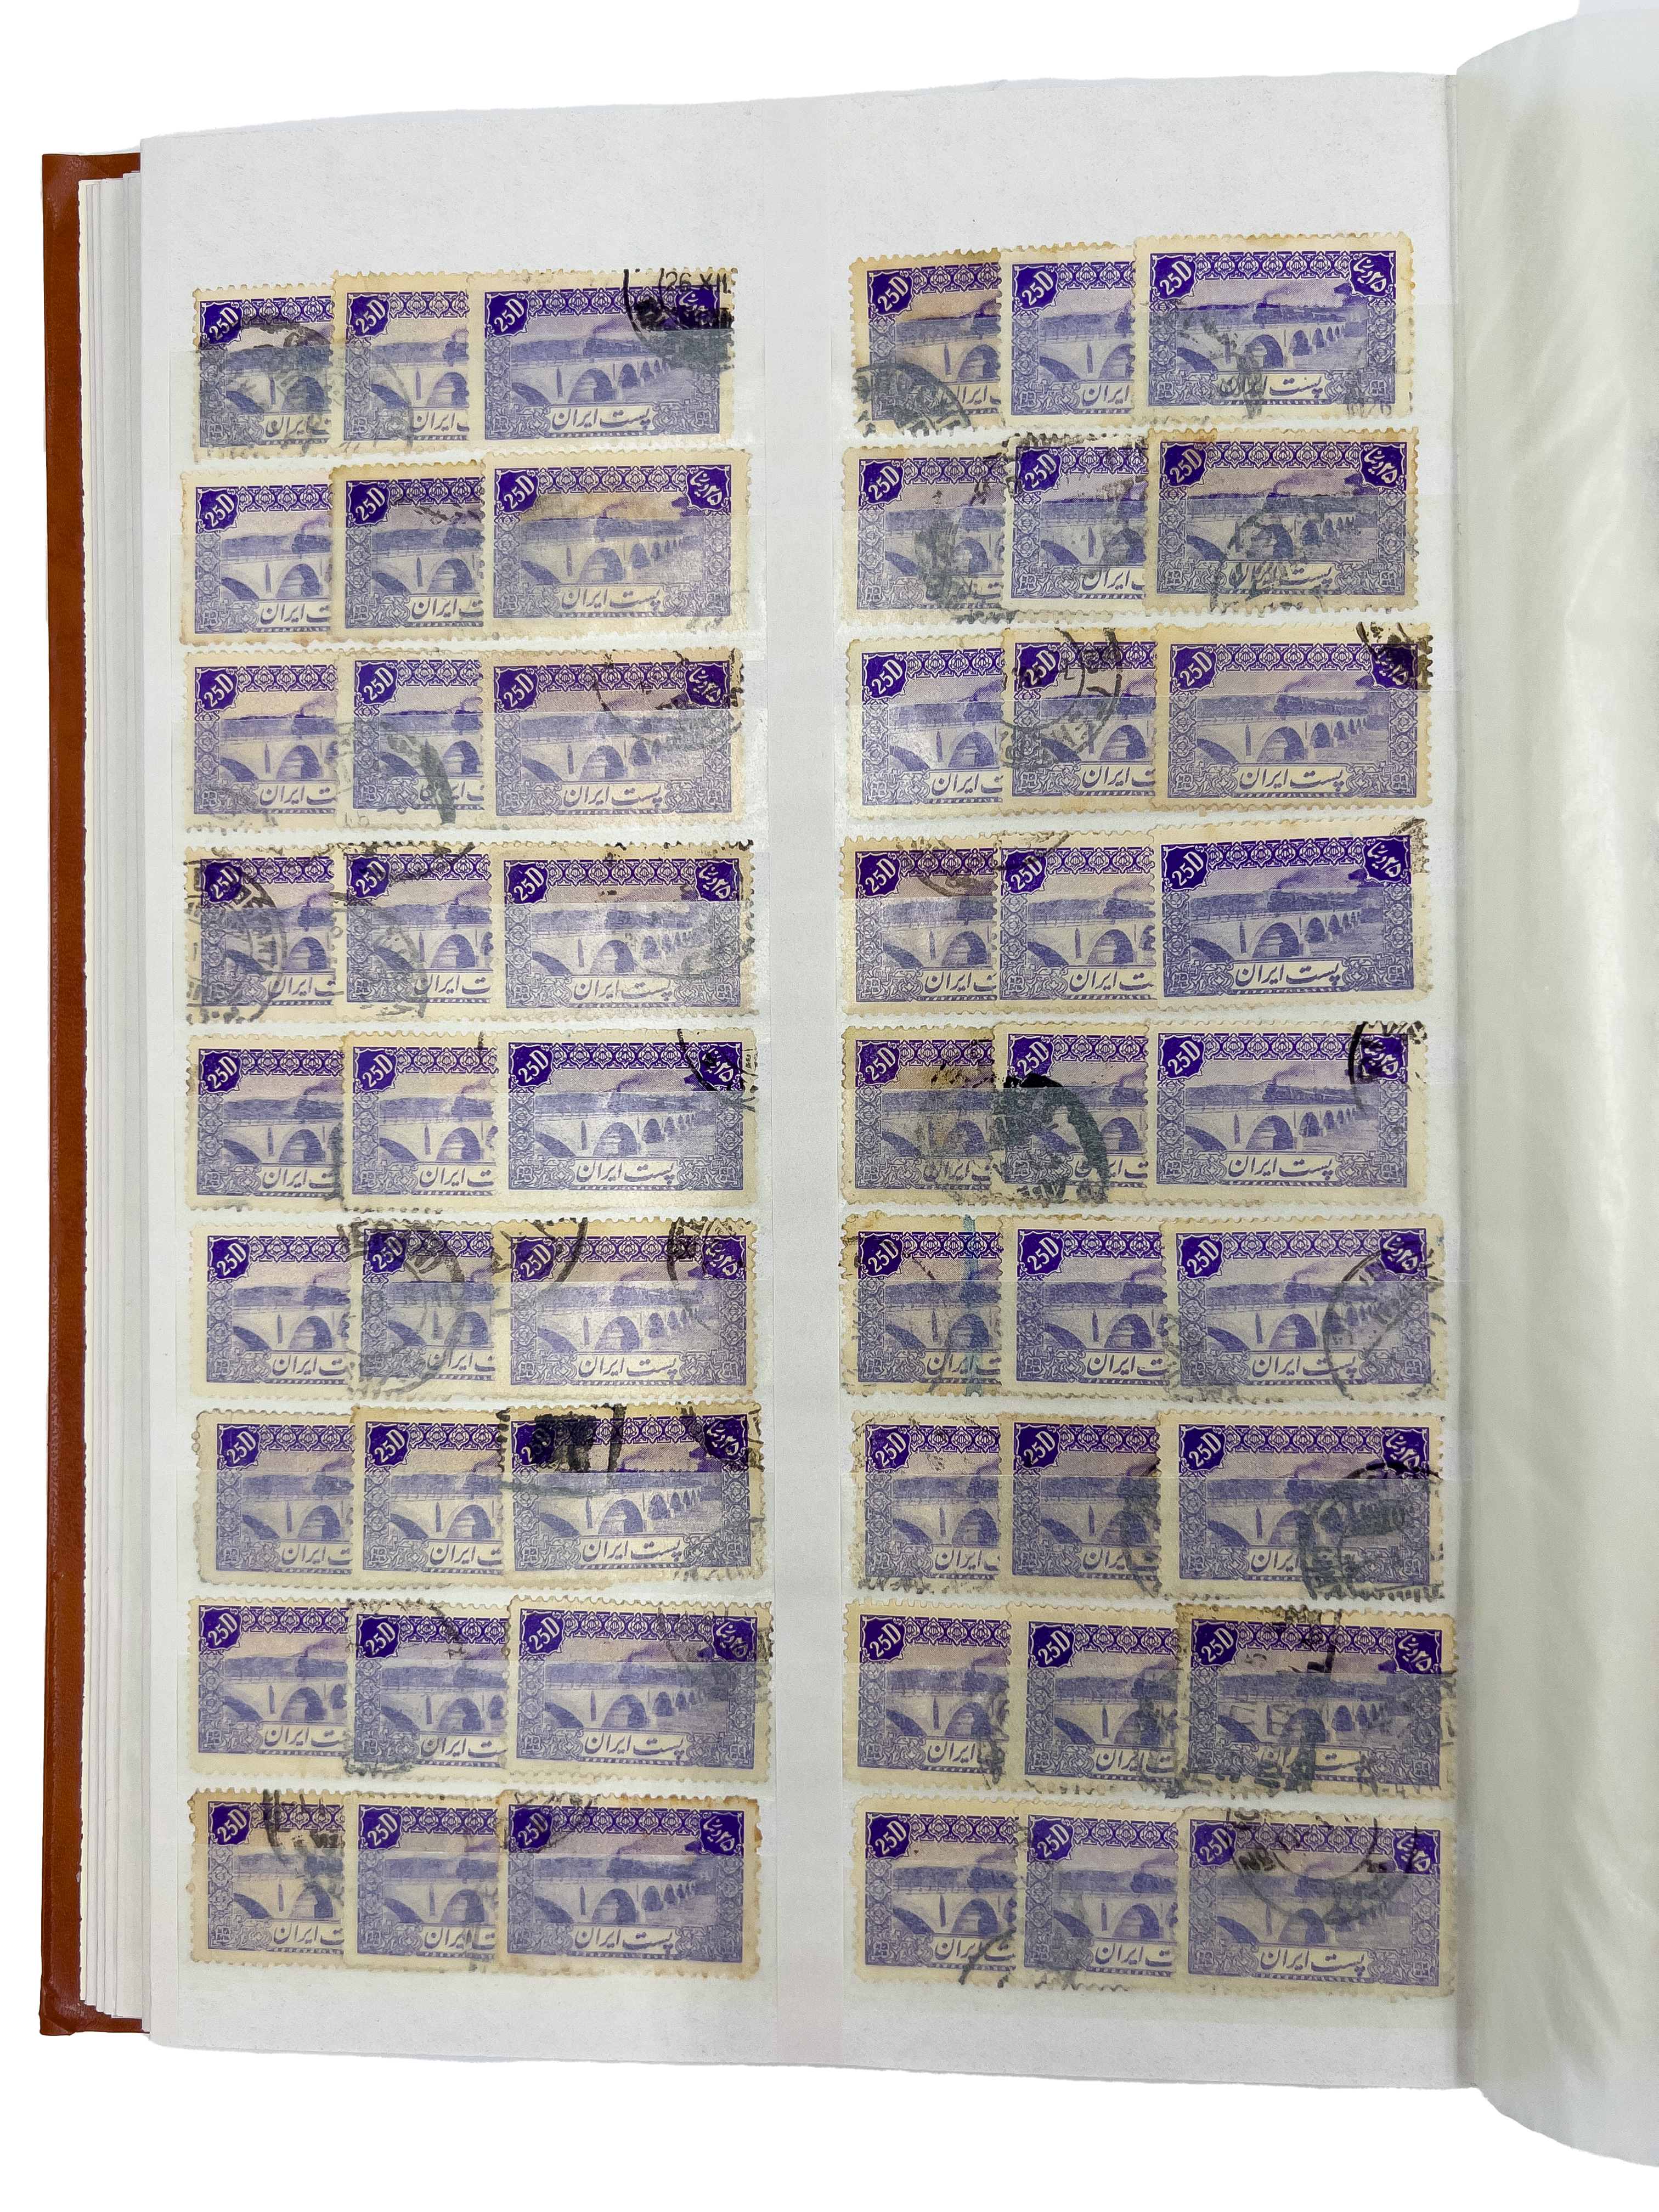 RARE & EXTENSIVE COLLECTION OF PERSIAN PAHLAVI POST STAMPS - Image 53 of 63